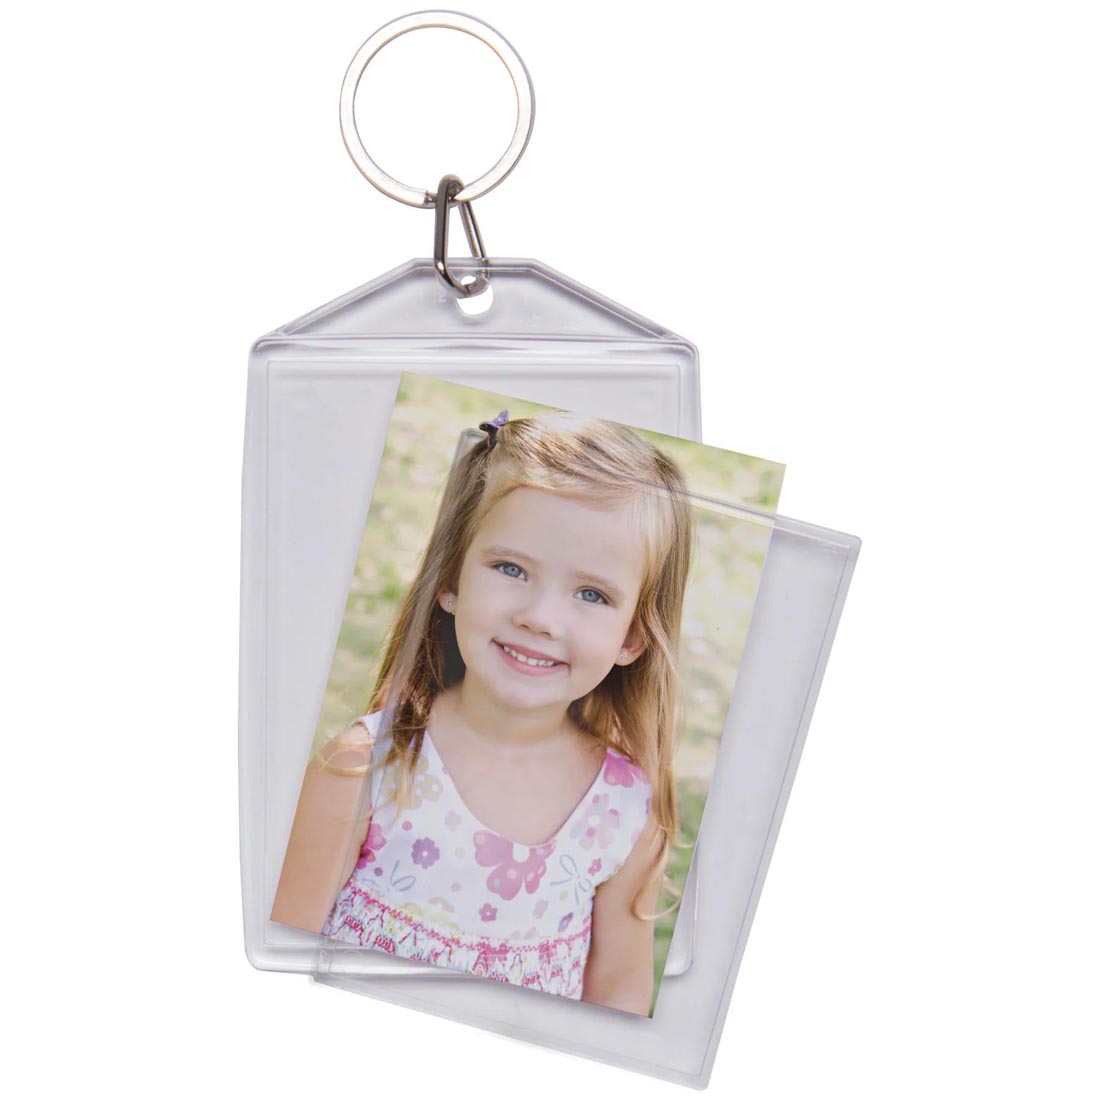 Clear Snap-In Photo Keychain with photo of child being inserted